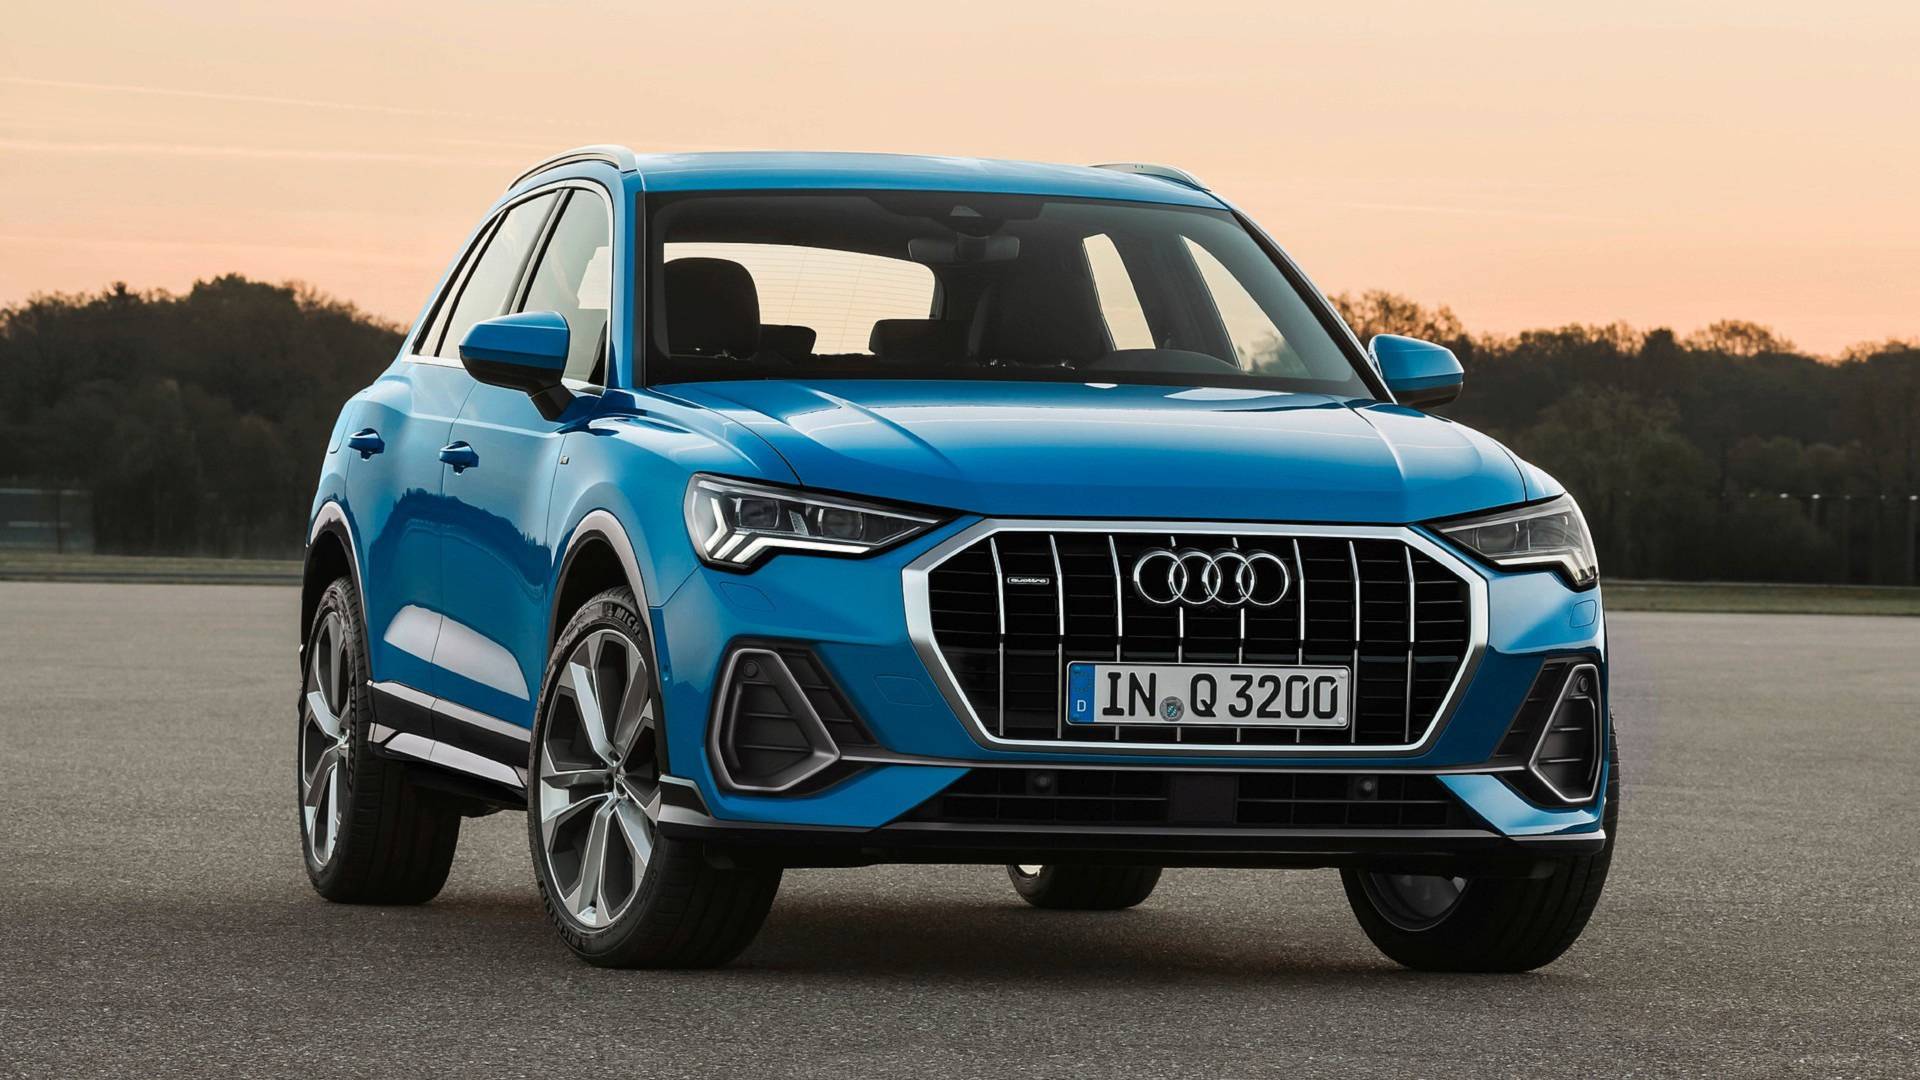 2019-audi-q3-is-bigger-more-high-tech-and-packs-up-to-230-hp-127358_1.jpg